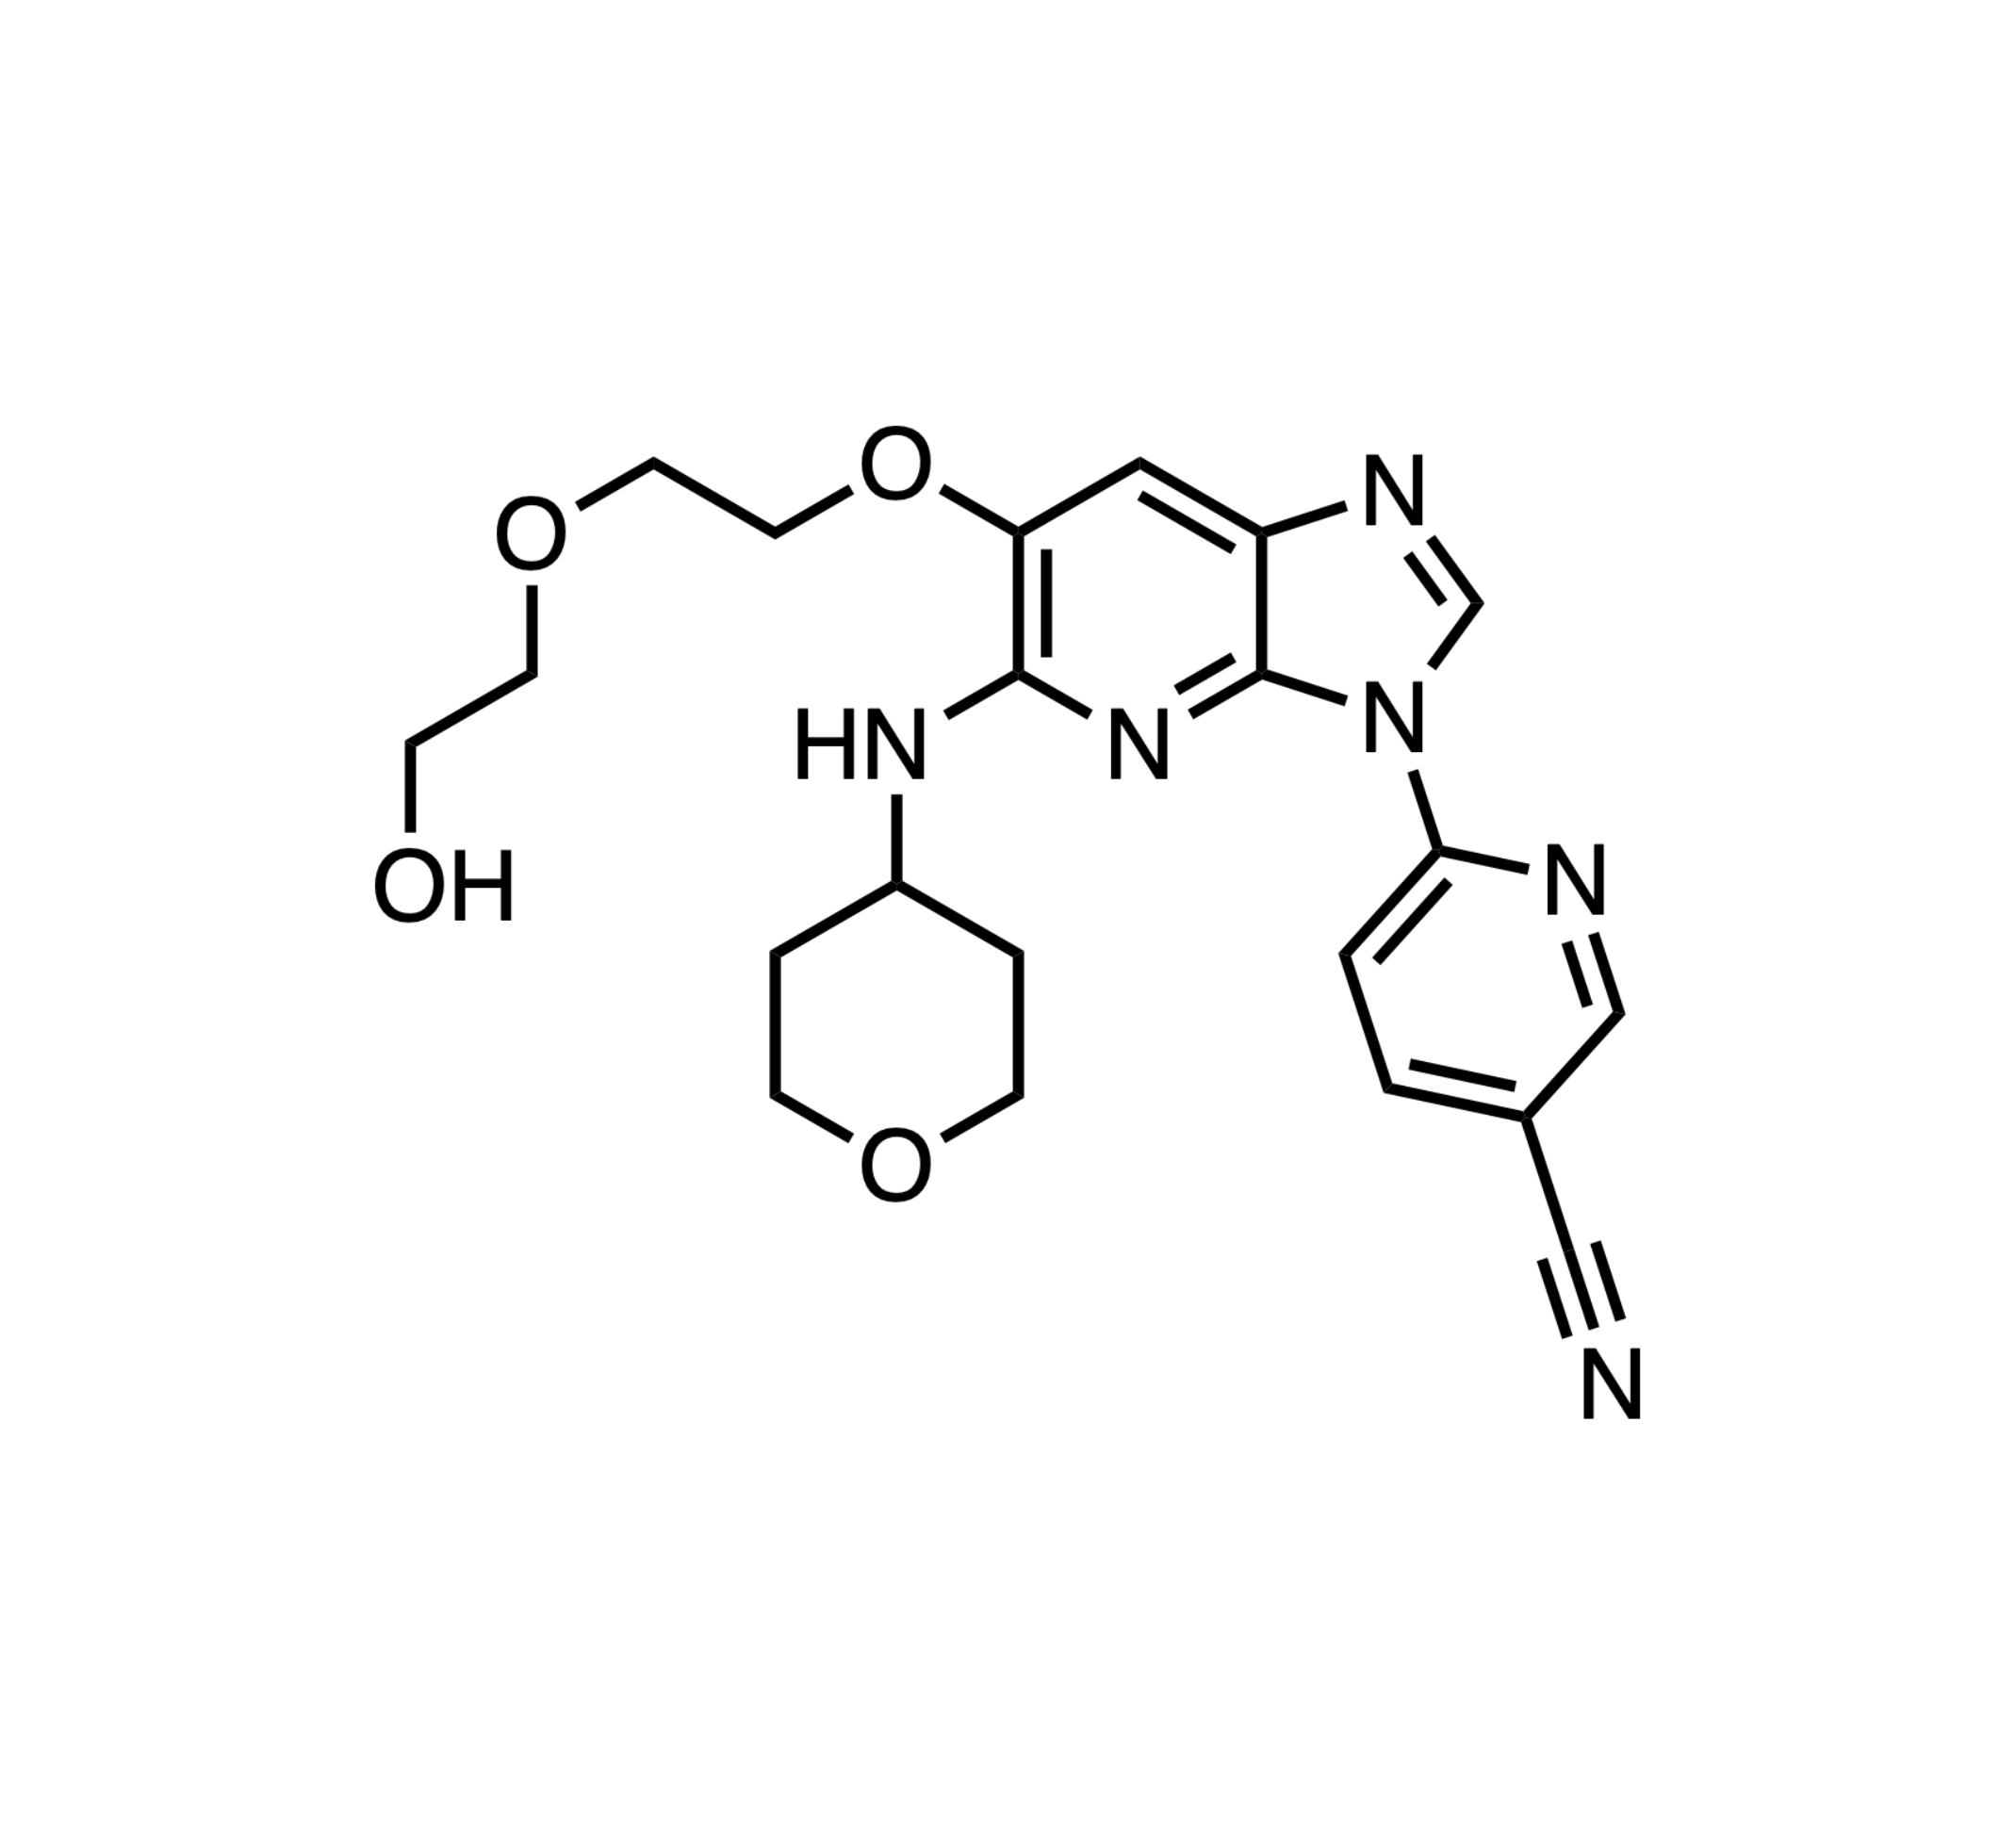 GLPG2534, oral IRAK4 inhibitor, promising activity in mouse model for atopic dermatitis, GALAPAGOS SASU, FR + NV, BE|GLPG2534, PF-06650833, GS-5718, CA-4948